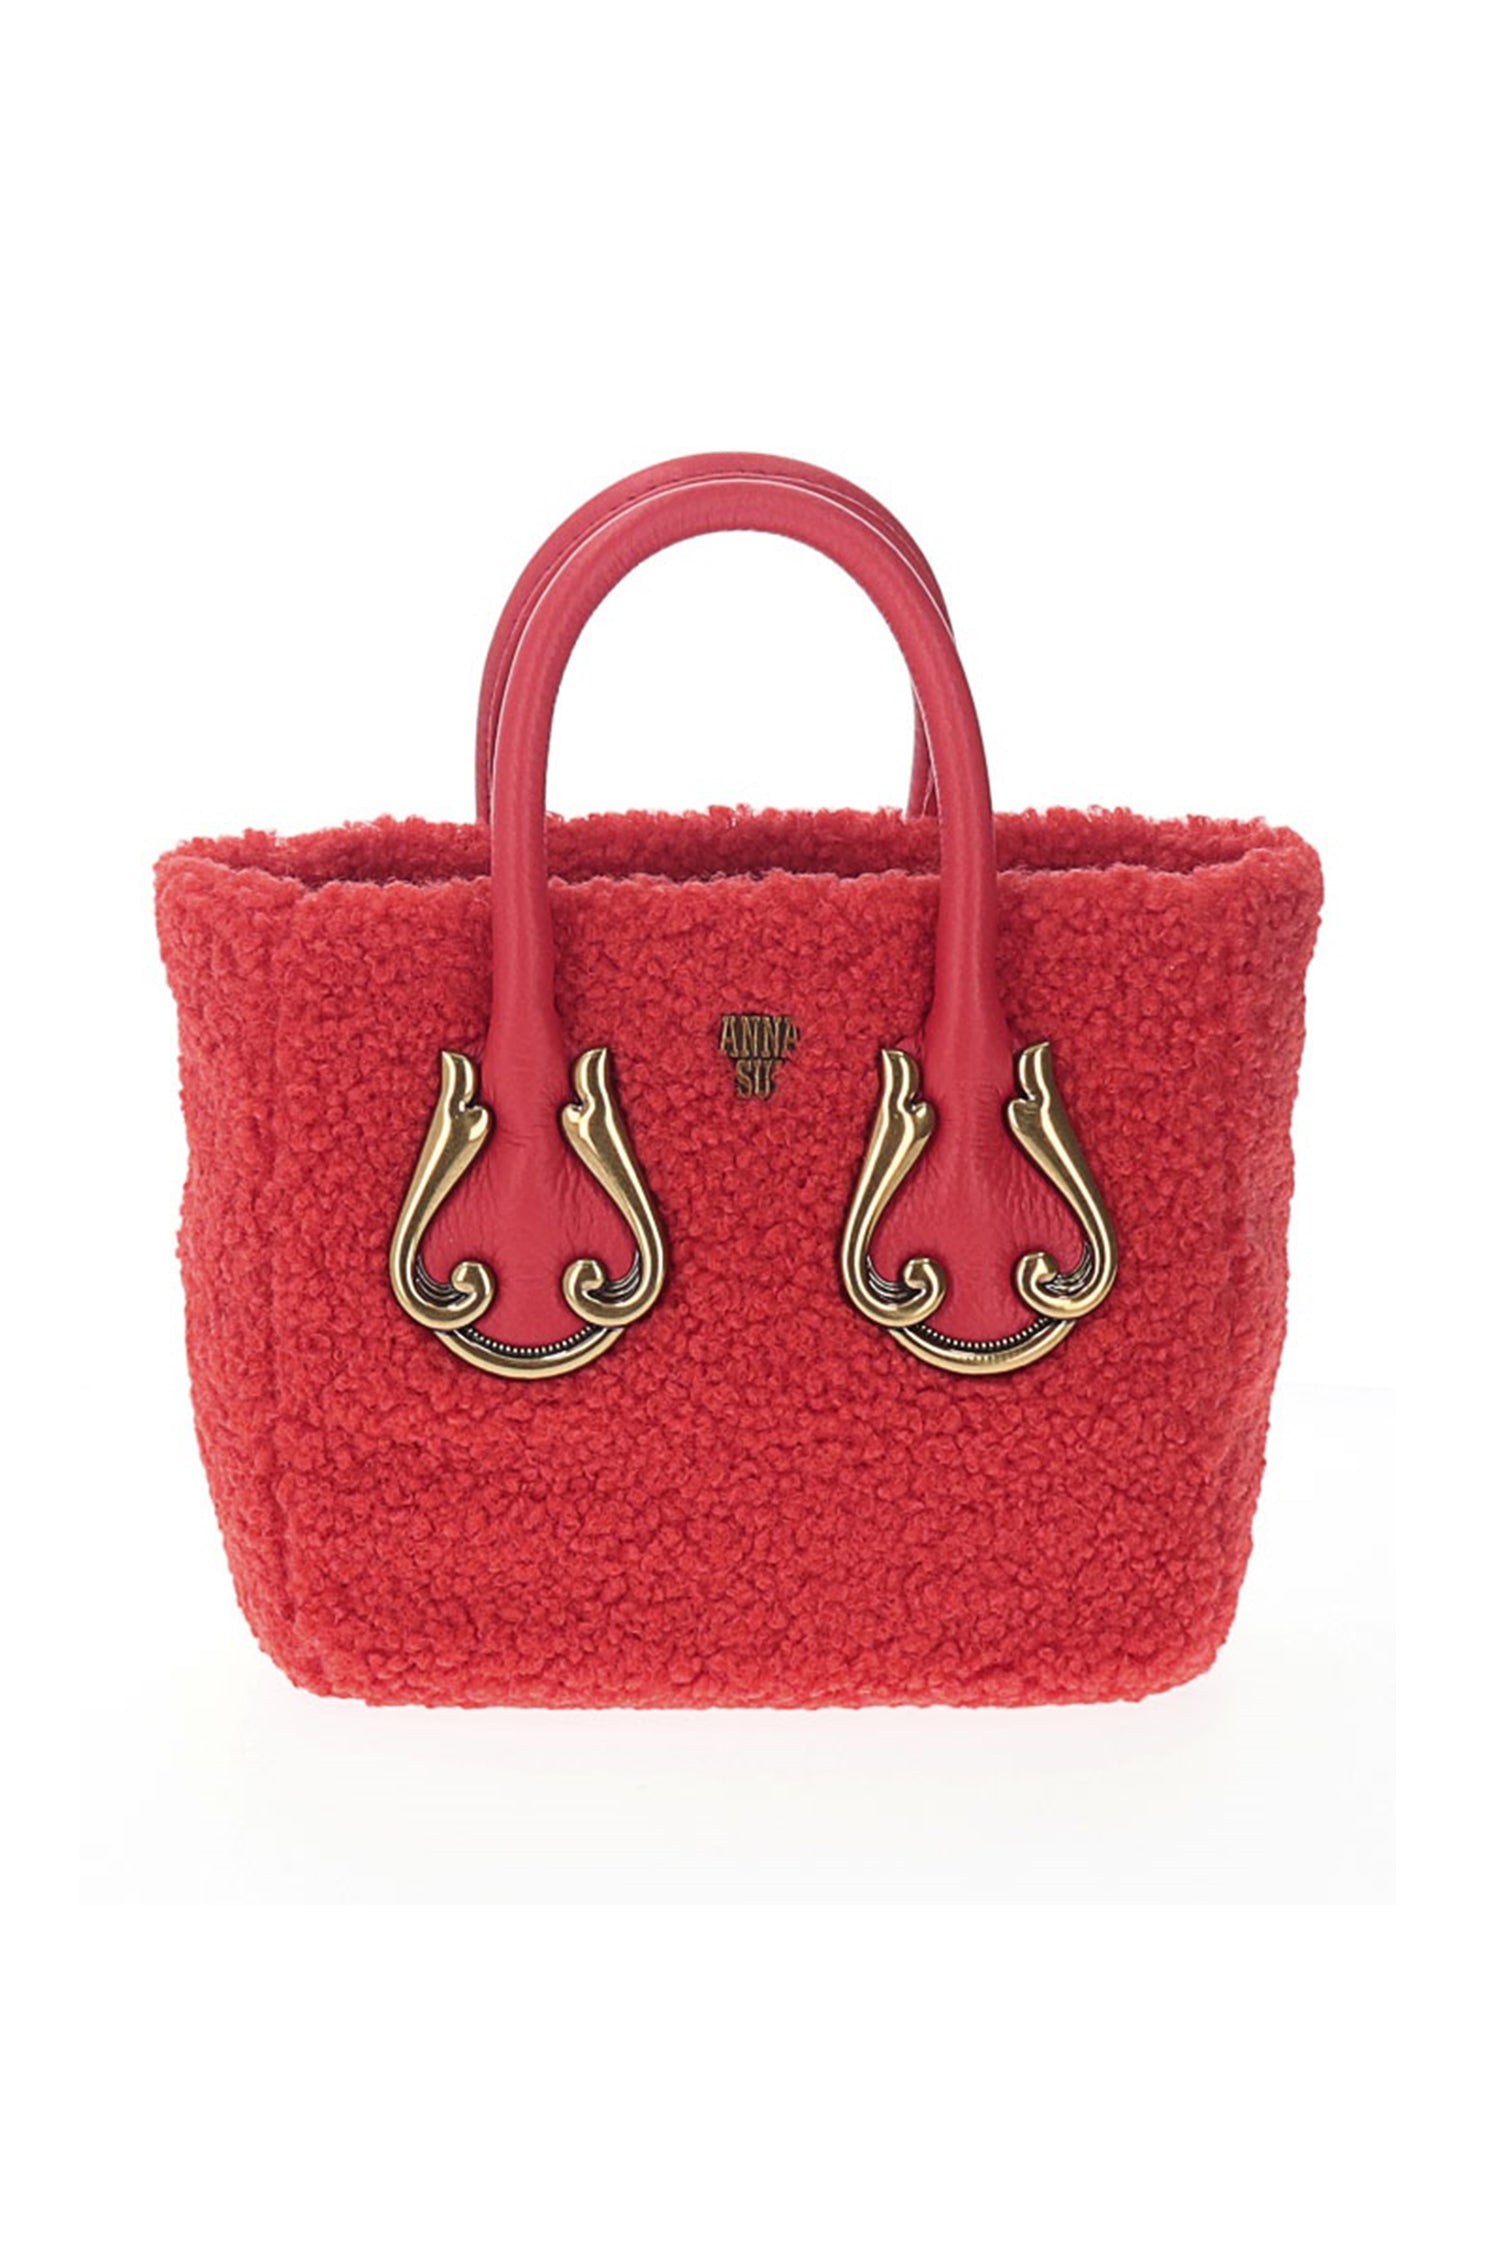 Bag Orange, Anna Sui logo in the fluffy material, 2-handdles highlighted with a golden arabesque